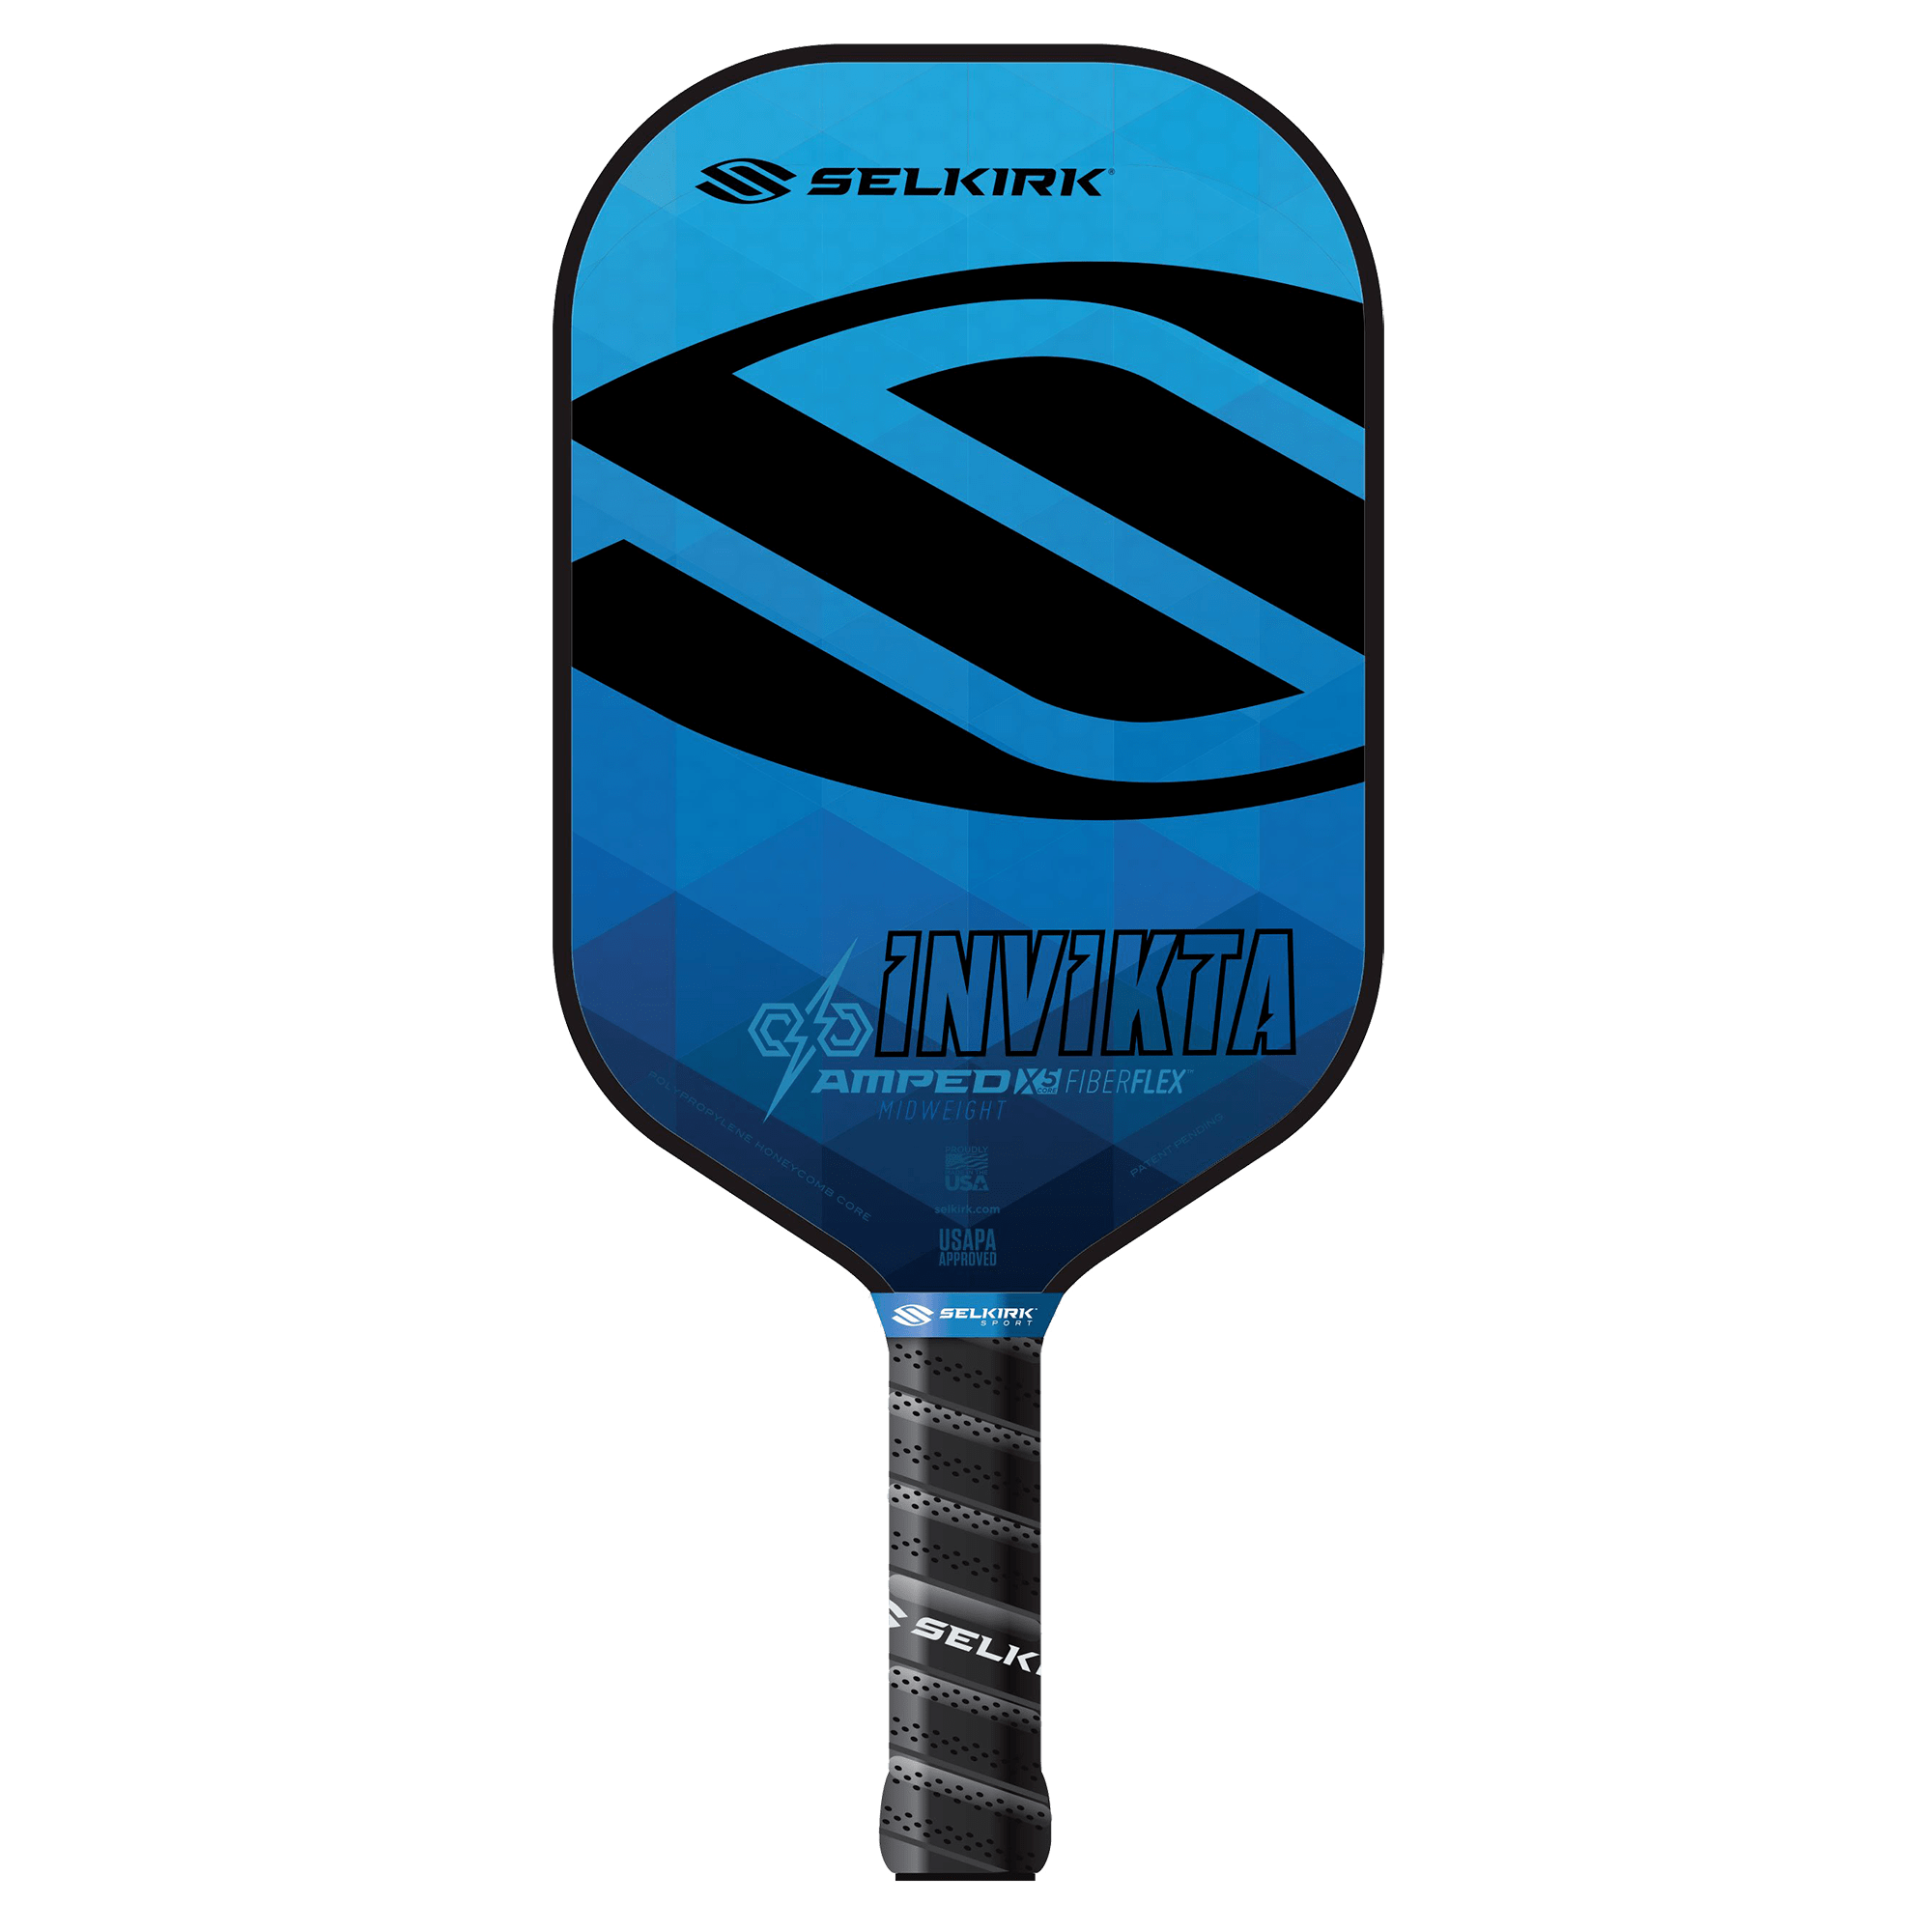 Wooden Pickleball Racket with Smooth Face Nighthawk Paddle & 2 Balls 1 Pickleball Paddle 2 Balls Ultra Cushion Grip Low Profile Paddle with 2 Balls